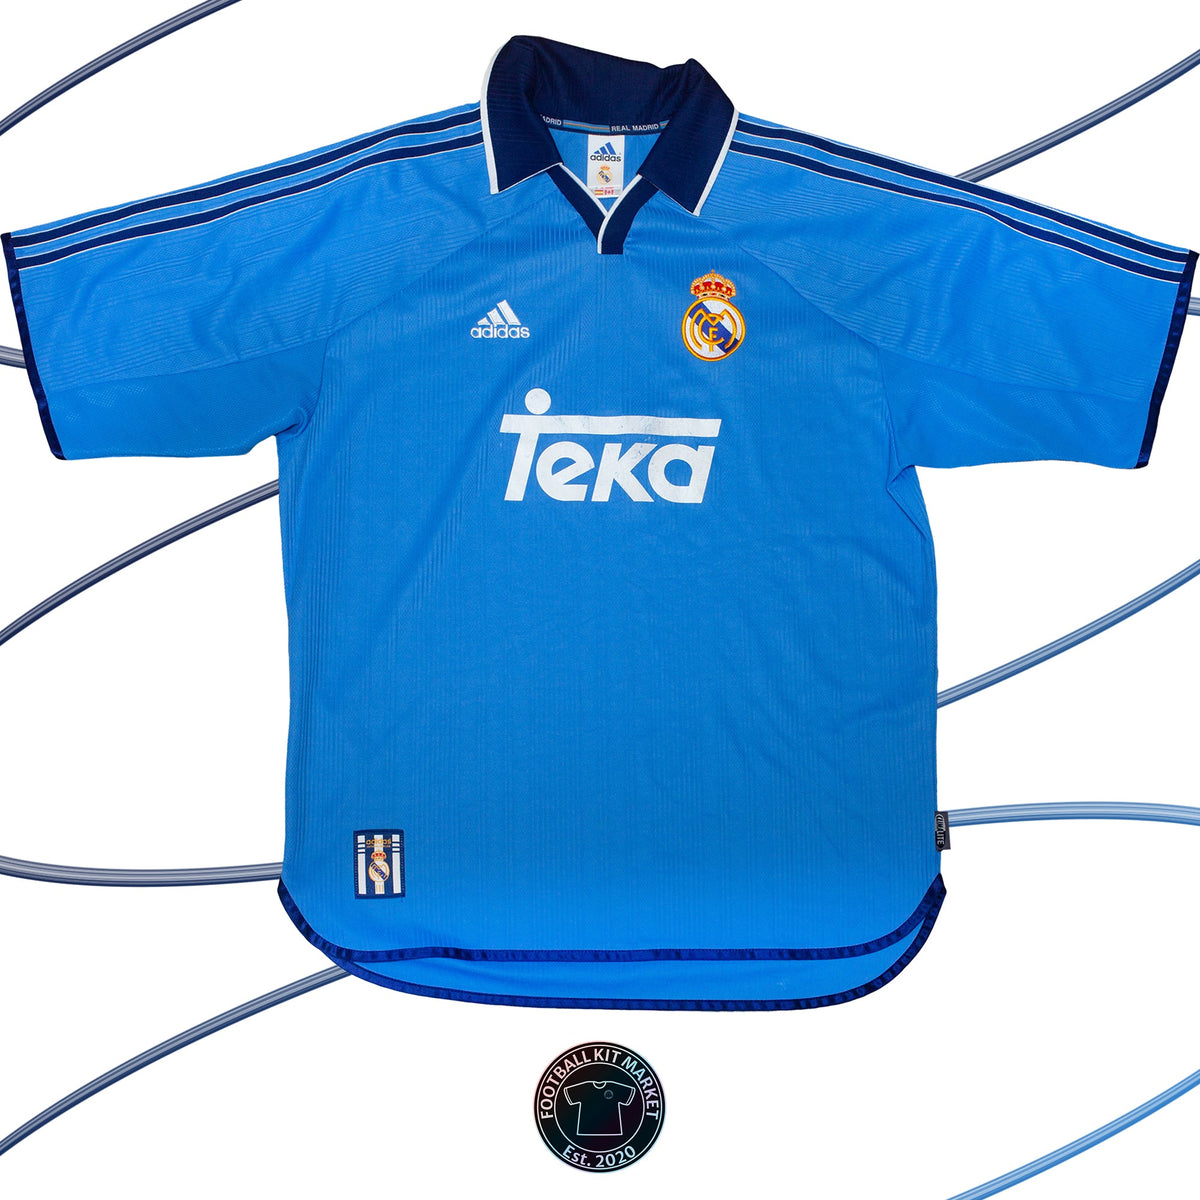 Genuine REAL MADRID 3rd (1999-2000) - ADIDAS (L) - Product Image from Football Kit Market